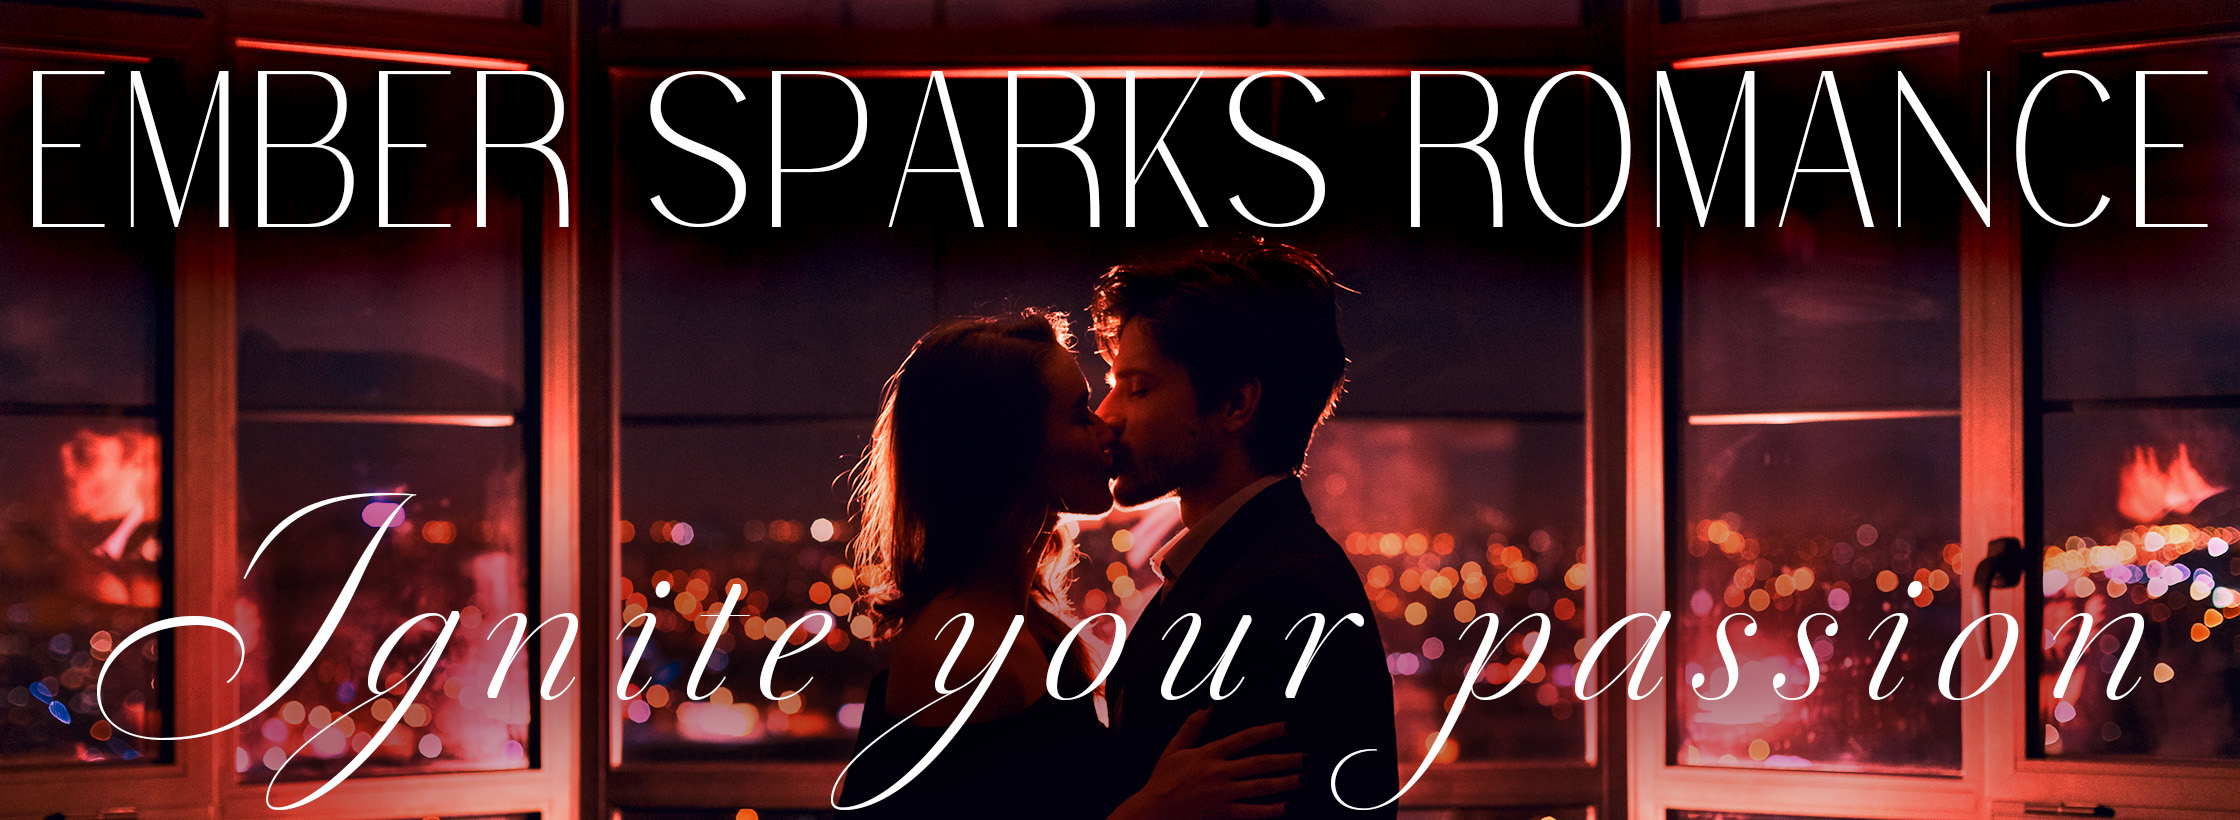 A man and woman embrace in front of floor-to-ceiling windows showcasing a city view at night. Above the couple, the headline reads "Ember Sparks Romance," and below them, in a scrolling font is the caption "Ignite your passion."